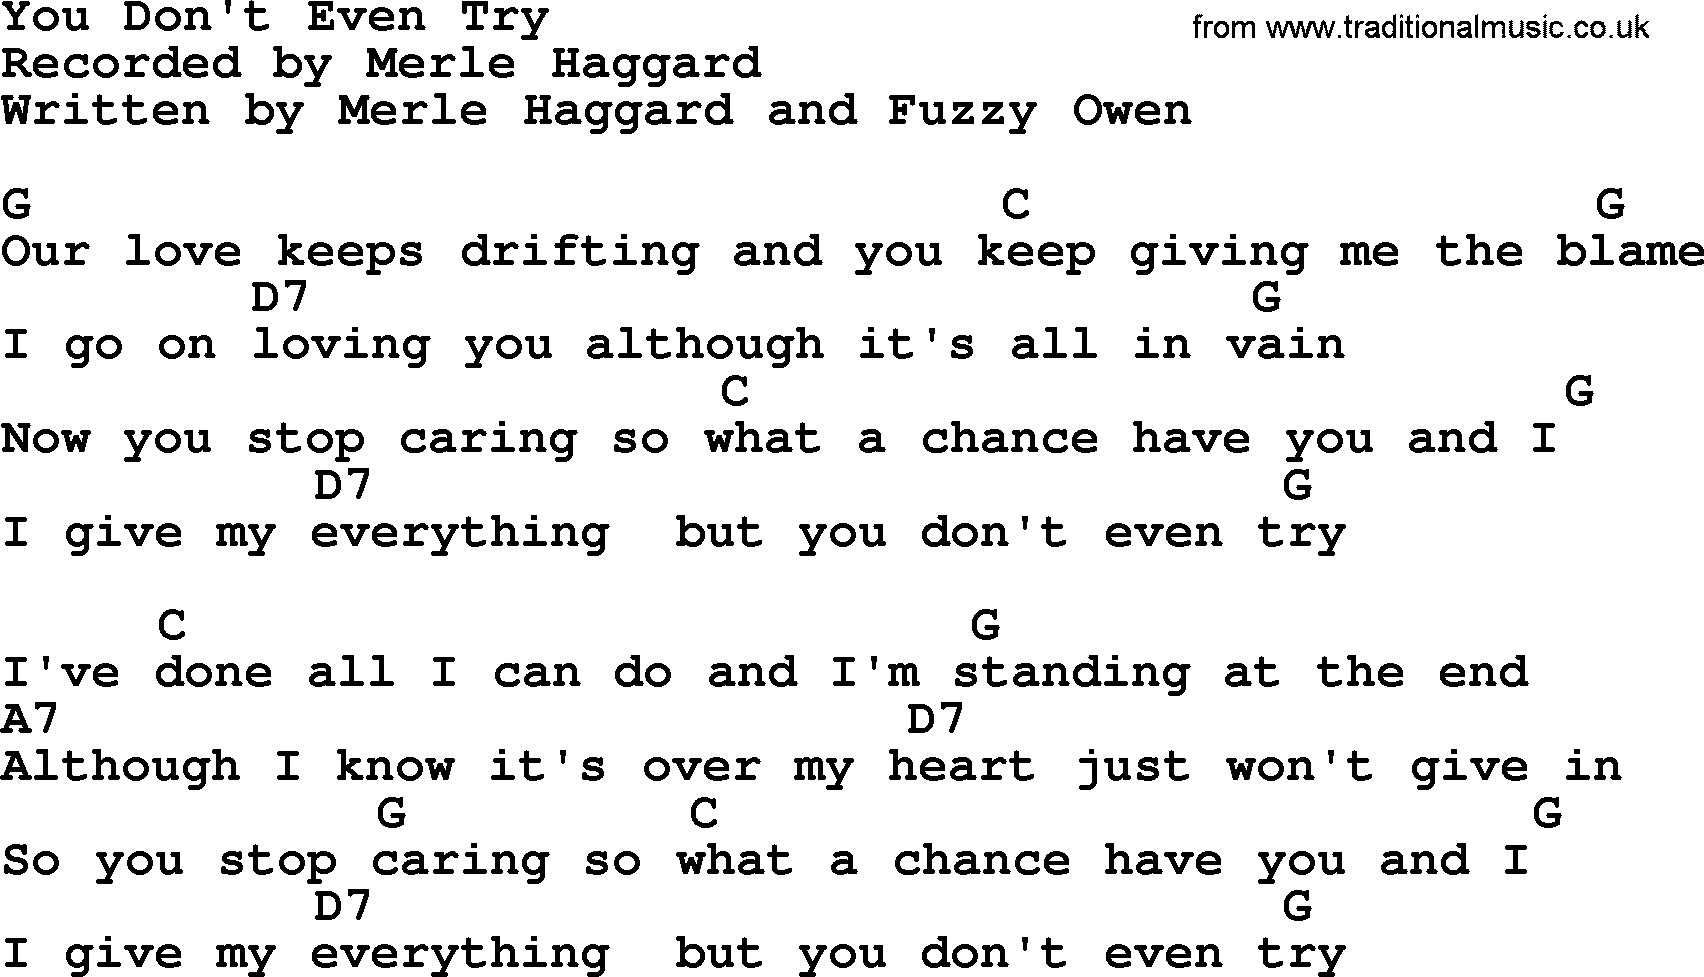 Merle Haggard song: You Don't Even Try, lyrics and chords